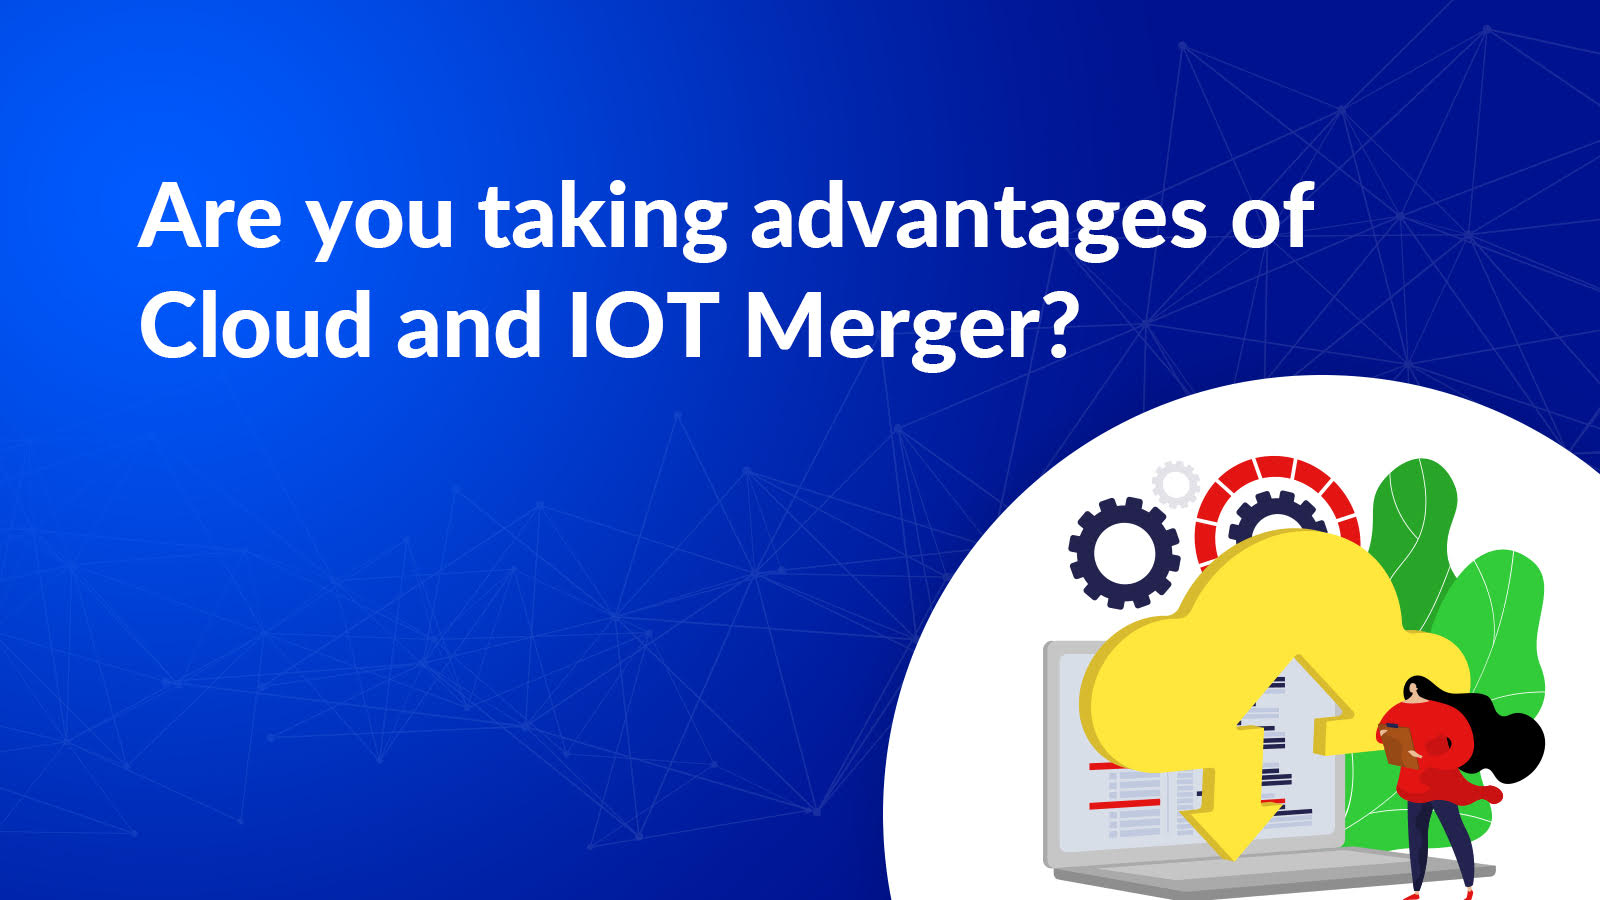 Iot and Cloud merger